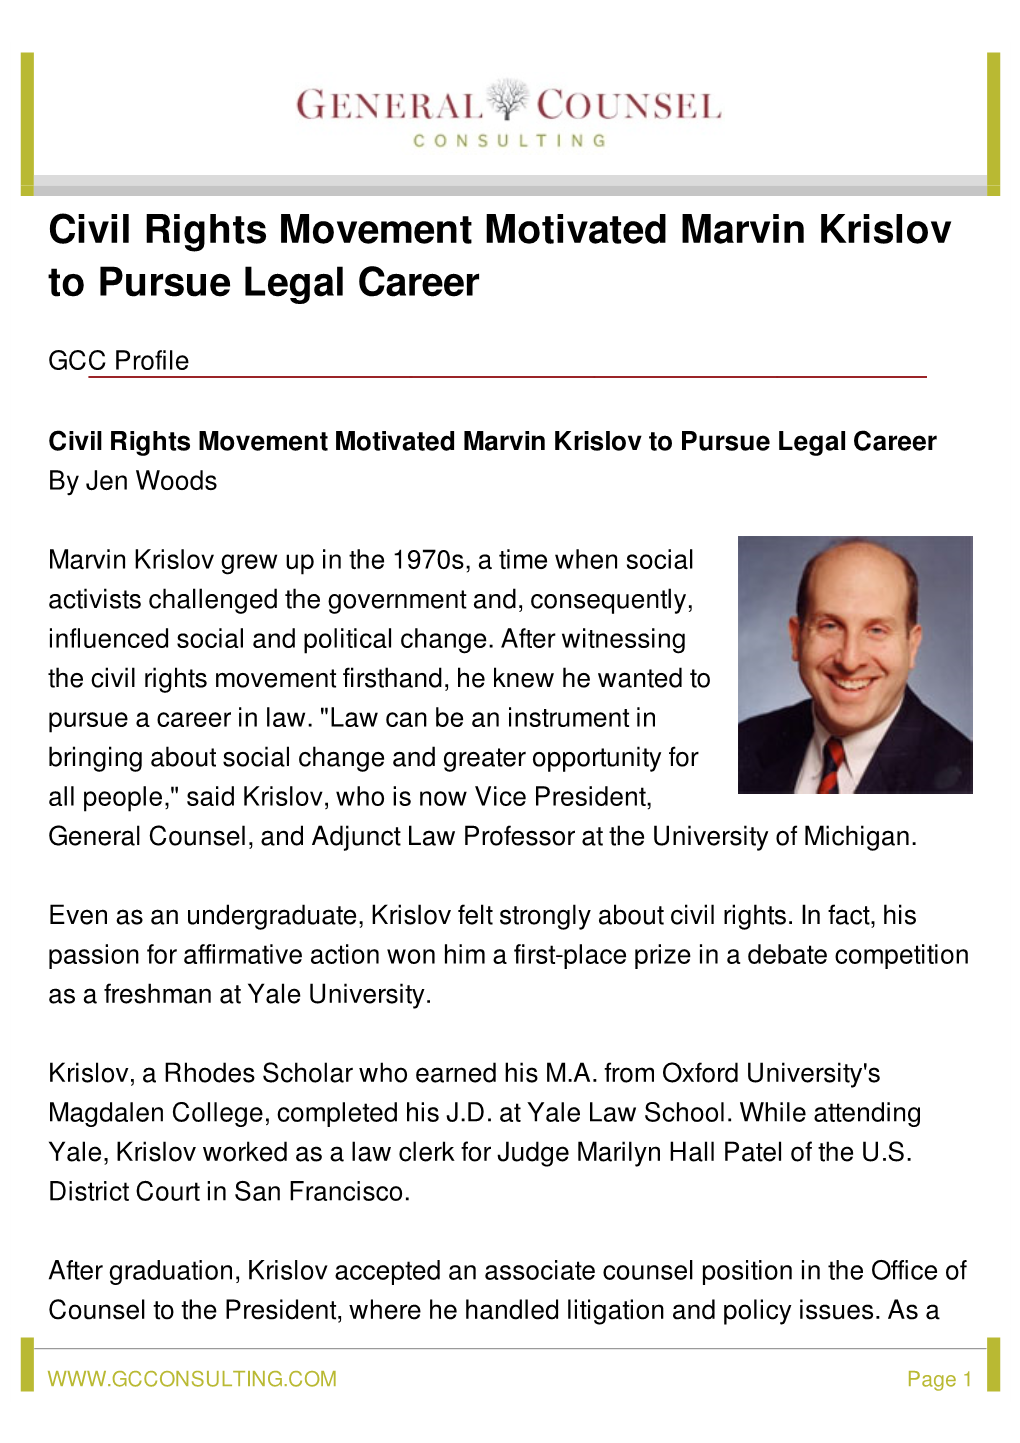 Civil Rights Movement Motivated Marvin Krislov to Pursue Legal Career